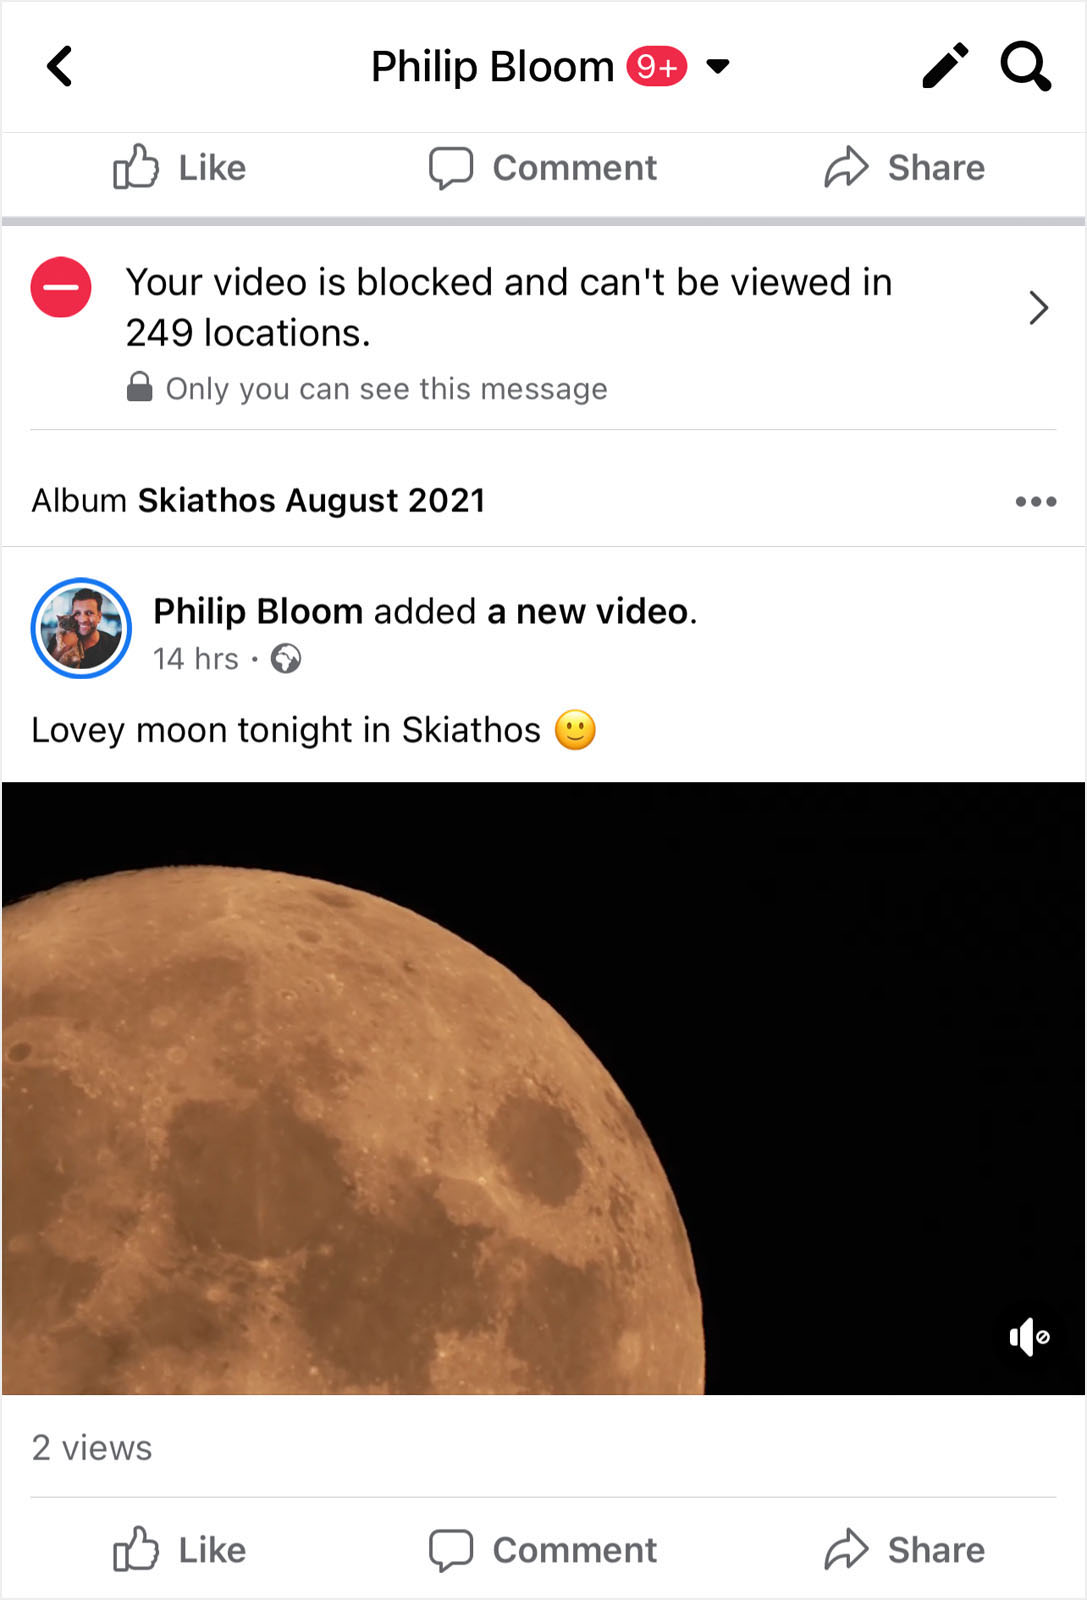 UMG Seems to Think it Copyrighted the Moon | PetaPixel